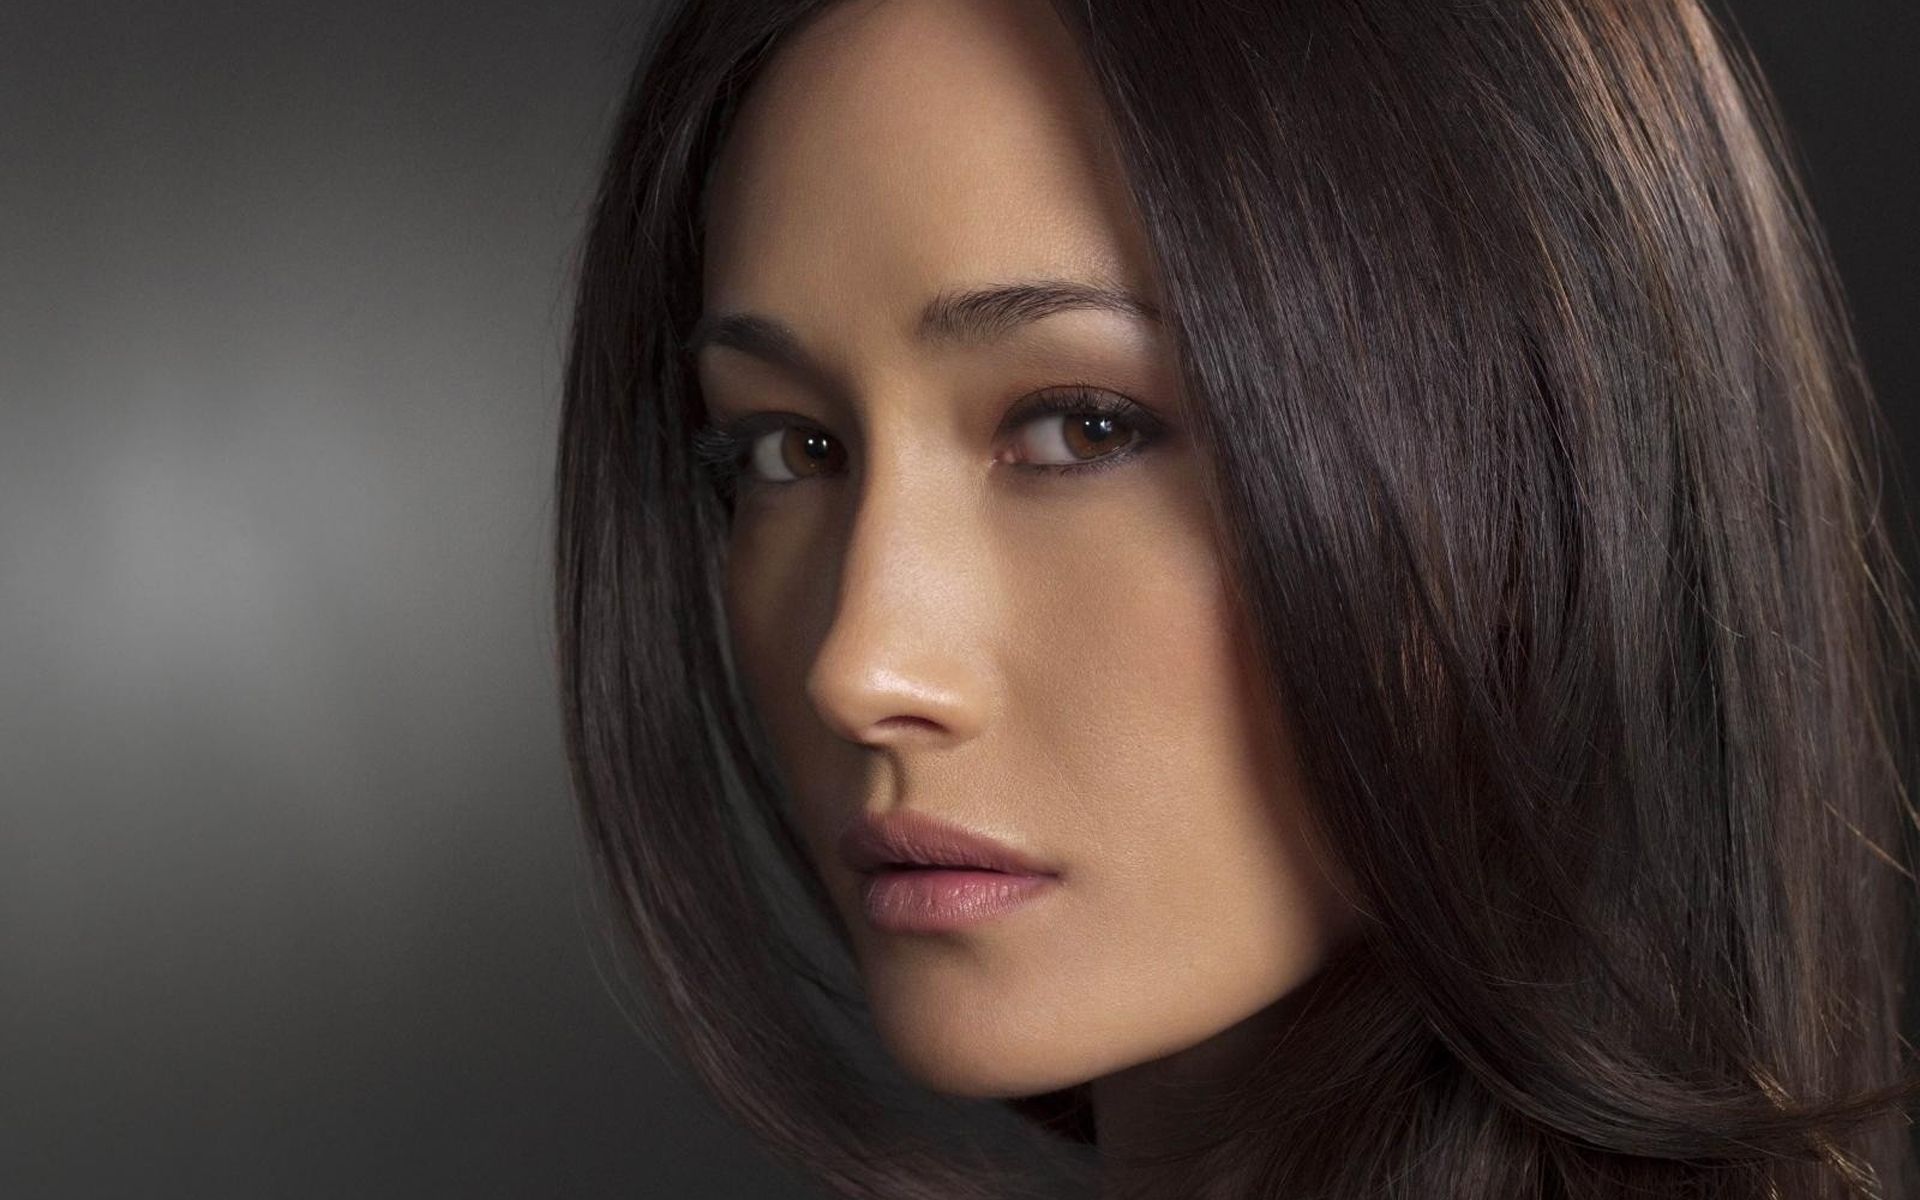 Maggie Q., star of the TV series Nikita, and Mililani High graduate, has made an appeal on behalf of less fortunate animals set to be killed Christmas Eve ...